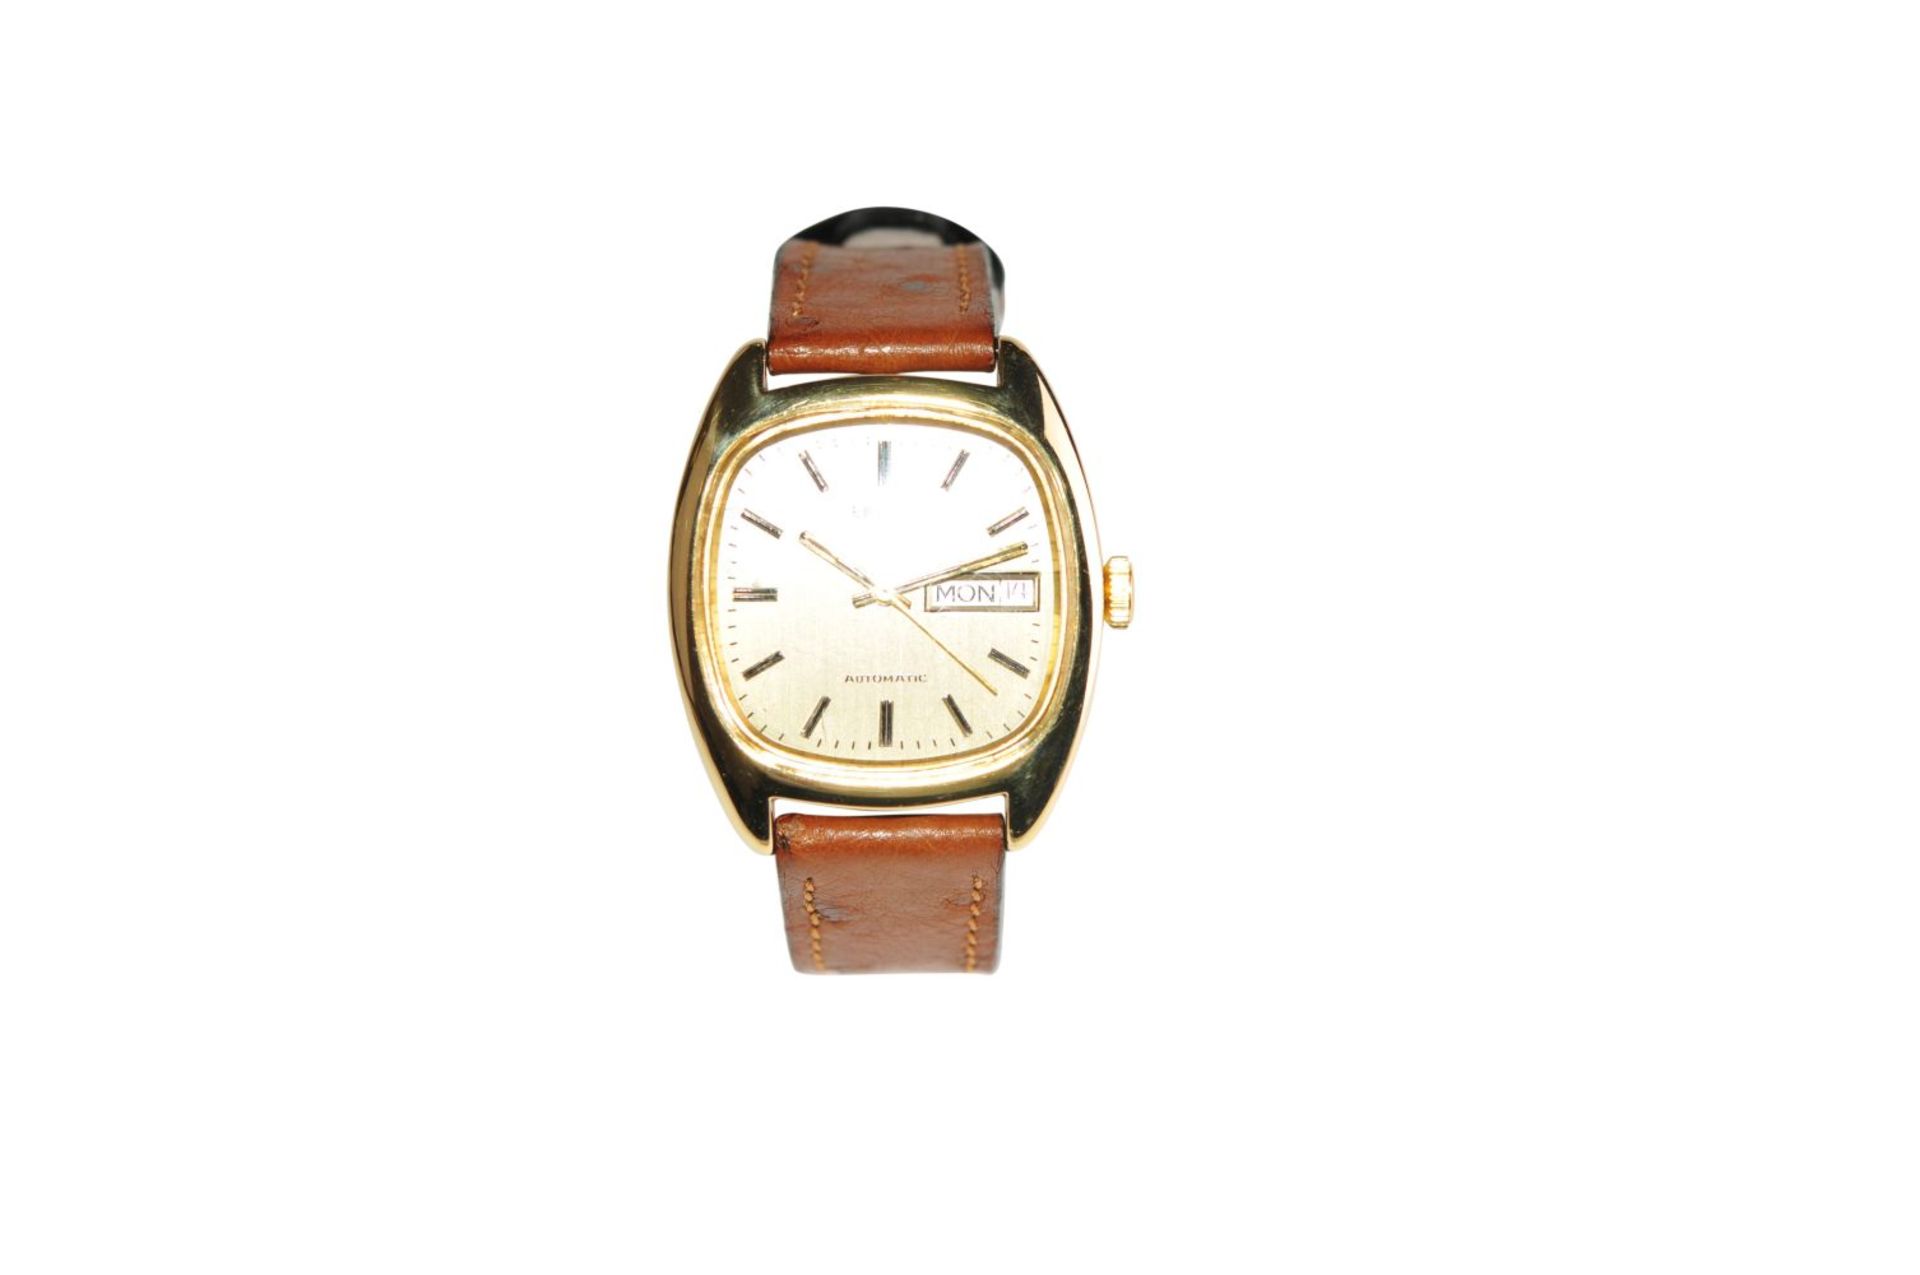 BULOVASwiss gold watch 41 mm x 34 mm 18 Kt solid case automatic day date with leather strap